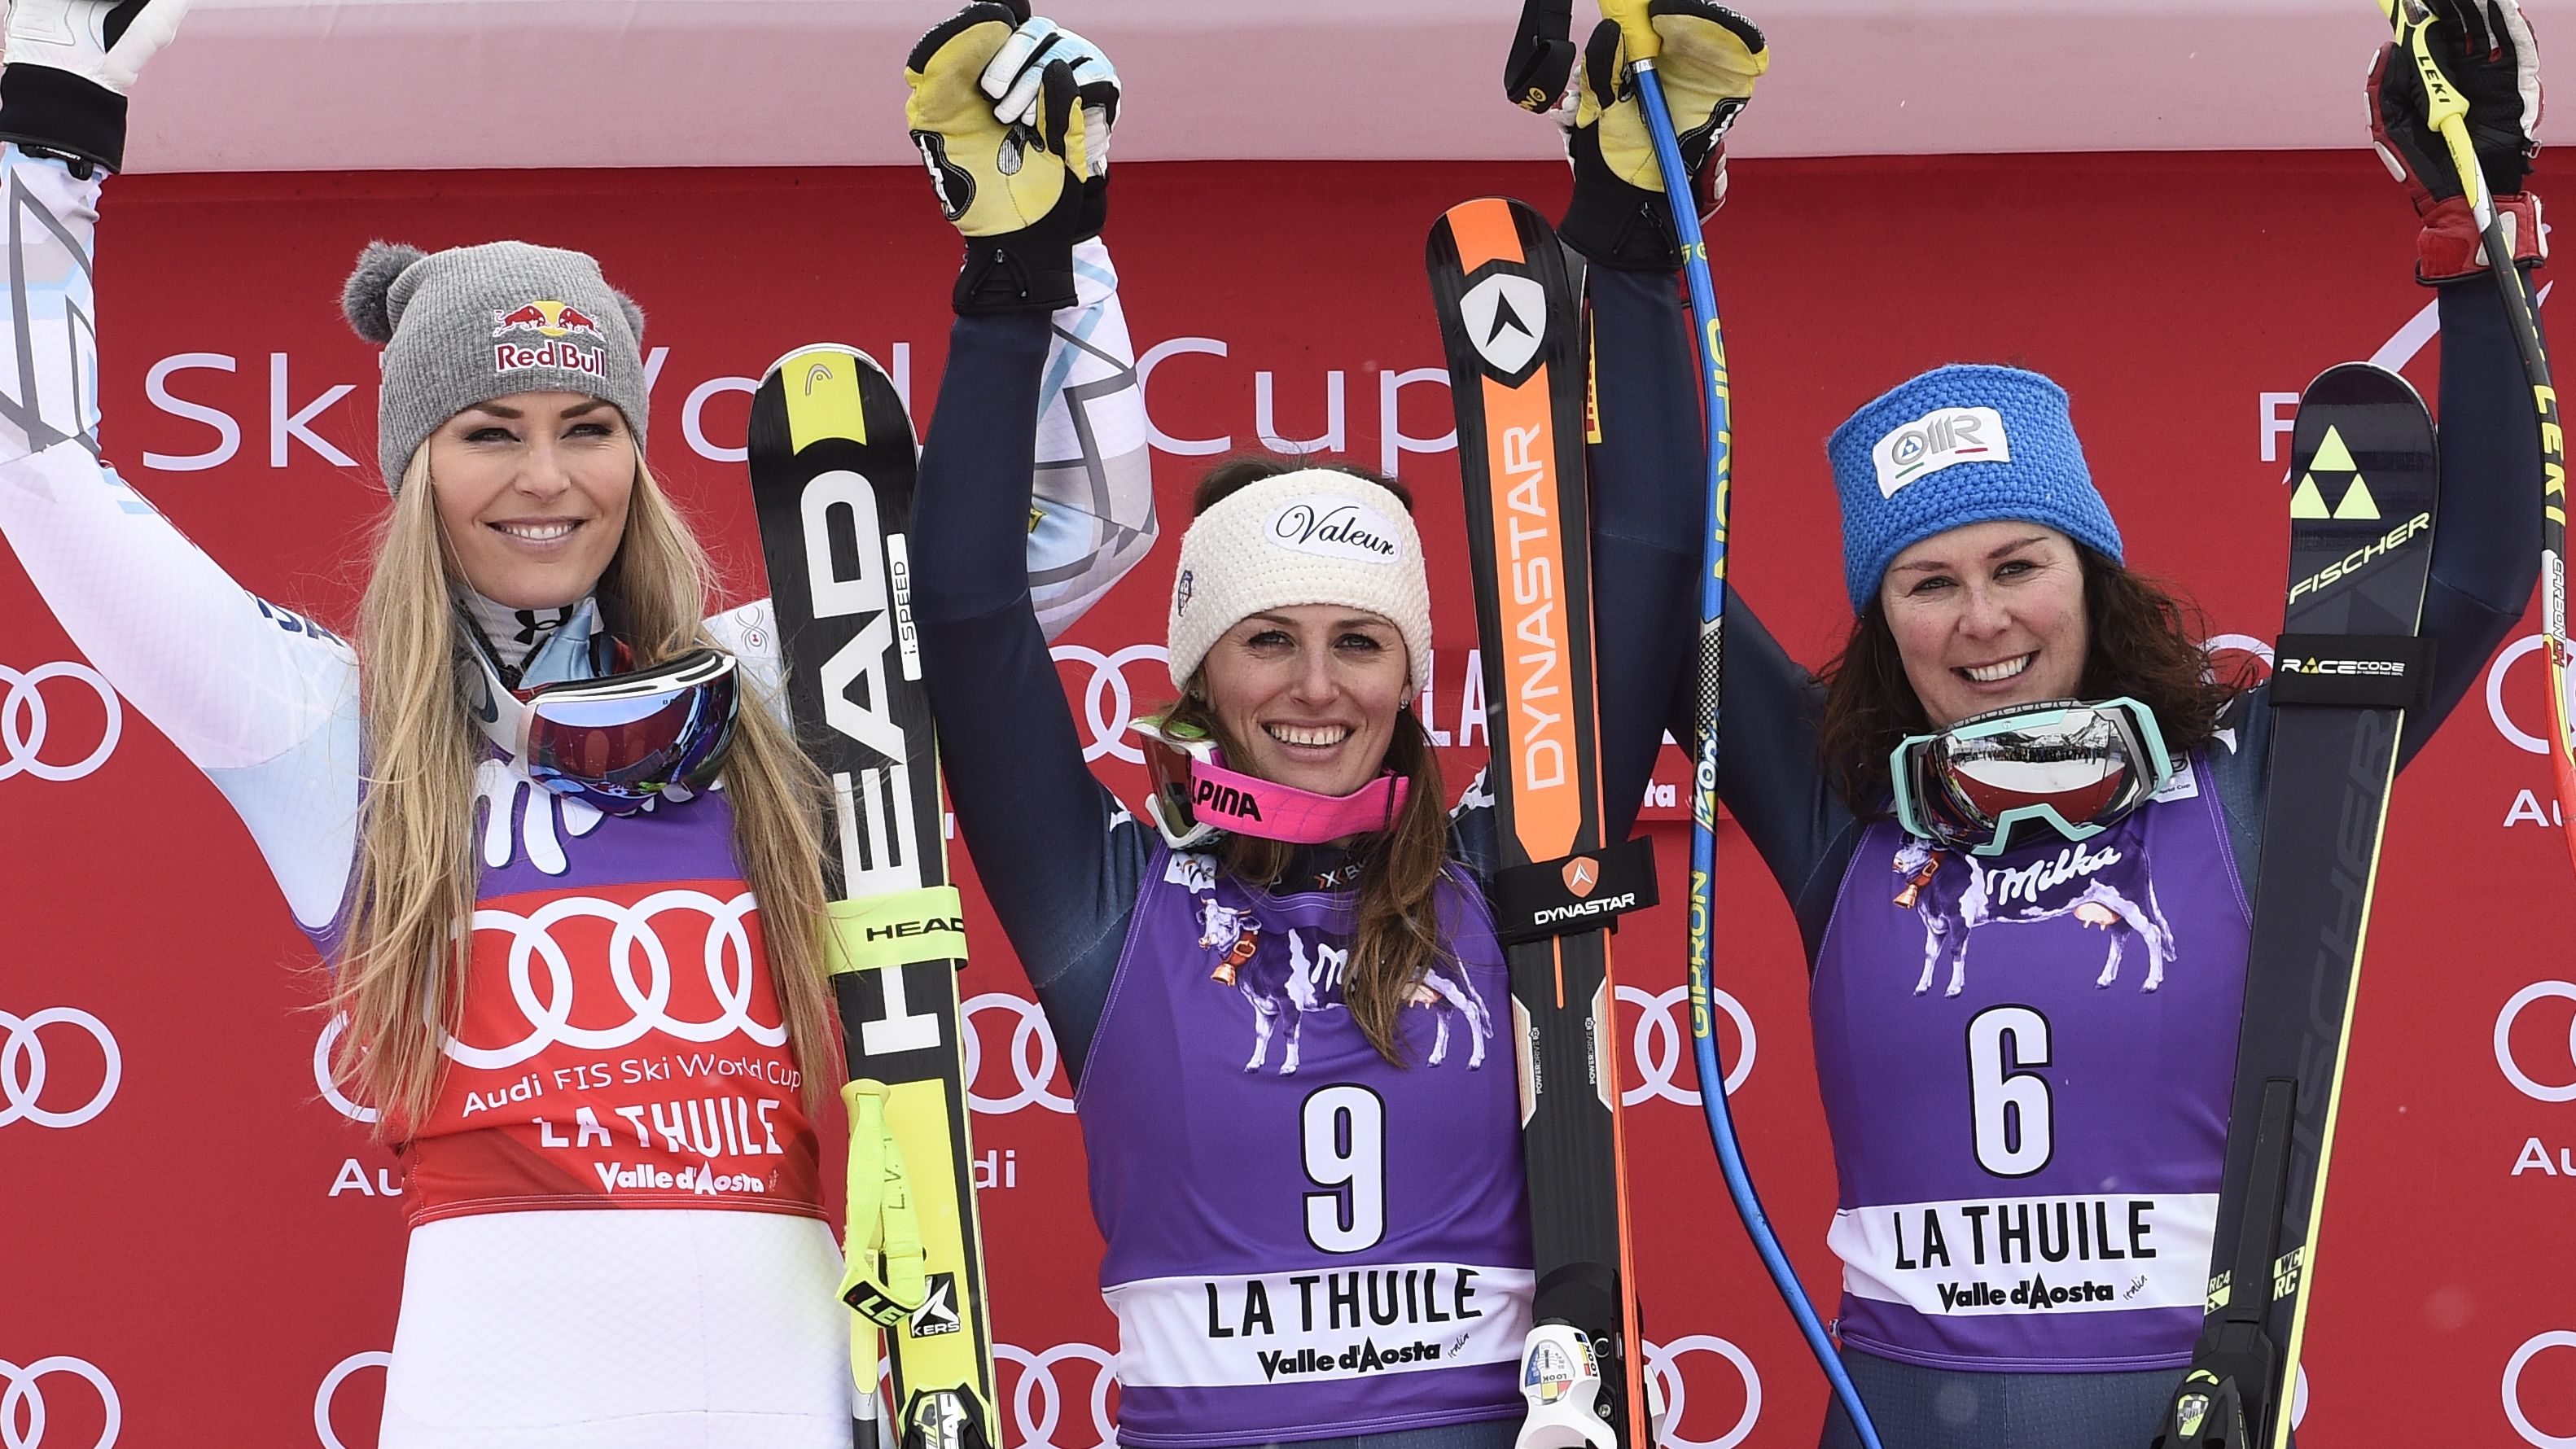 Lindsey Vonn (left) took second place in the World Cup downhill in La Thuile behind Nadia Fanchini of Italy. 